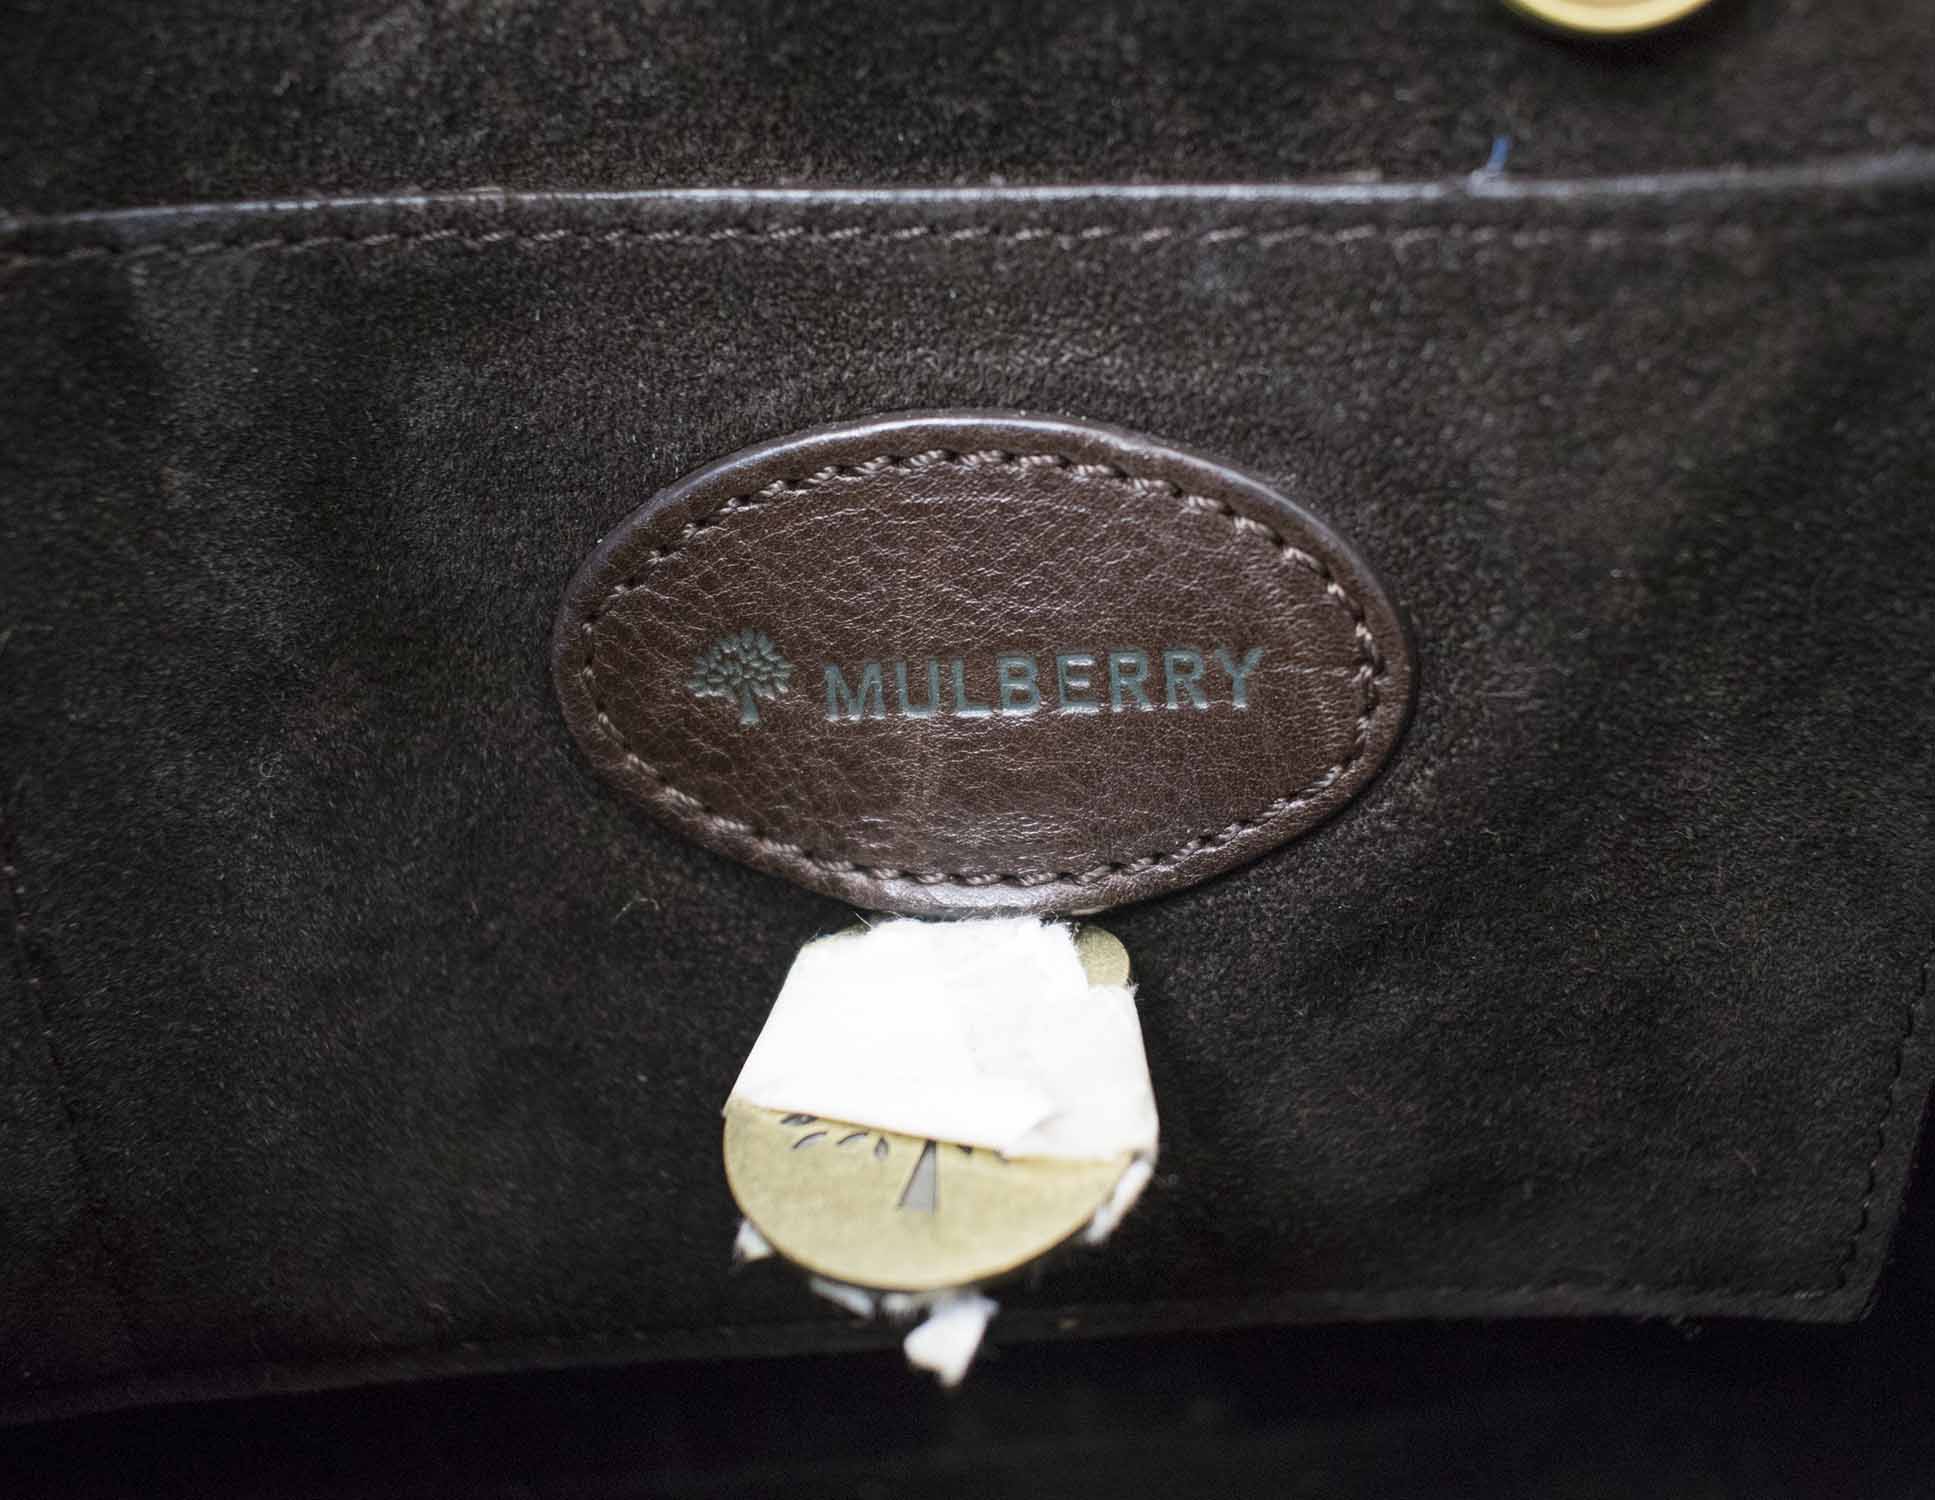 real mulberry bag logo